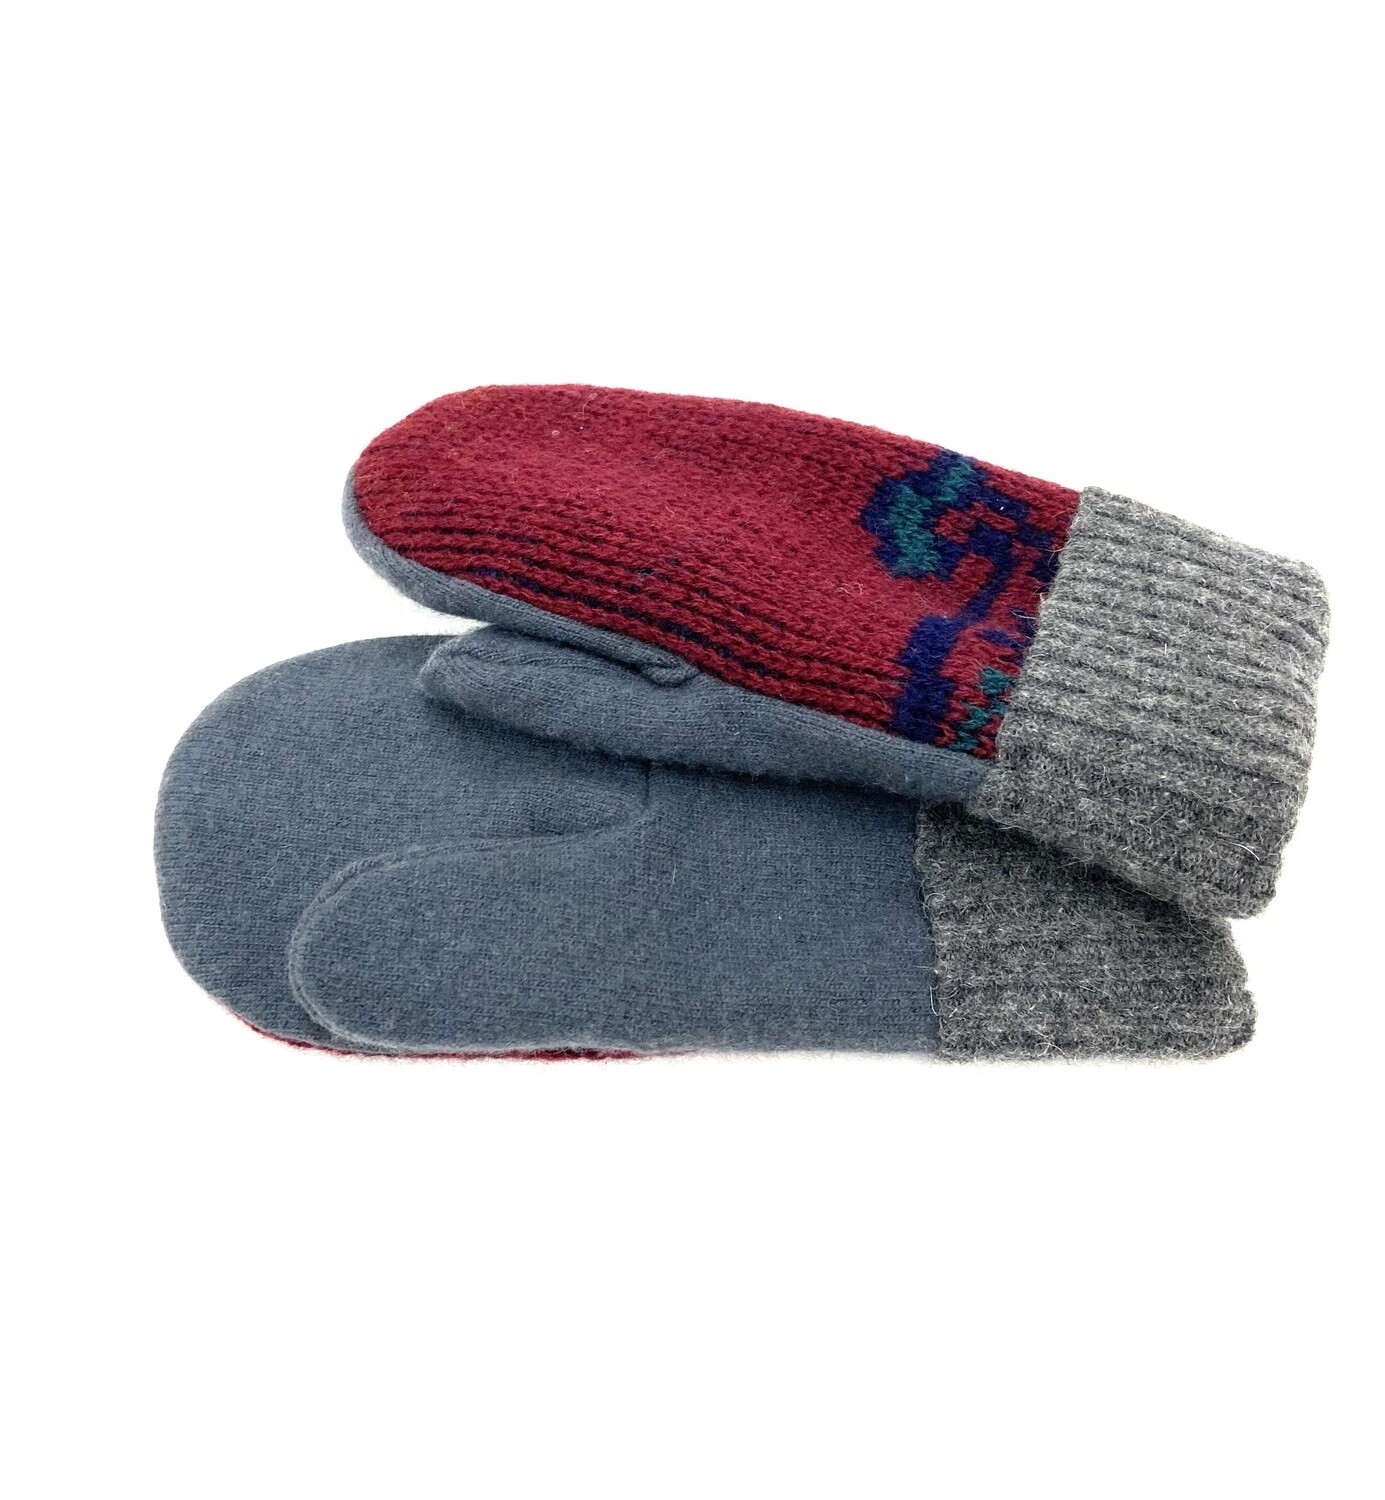 Small Maroon and Grey- Mary's Mittens